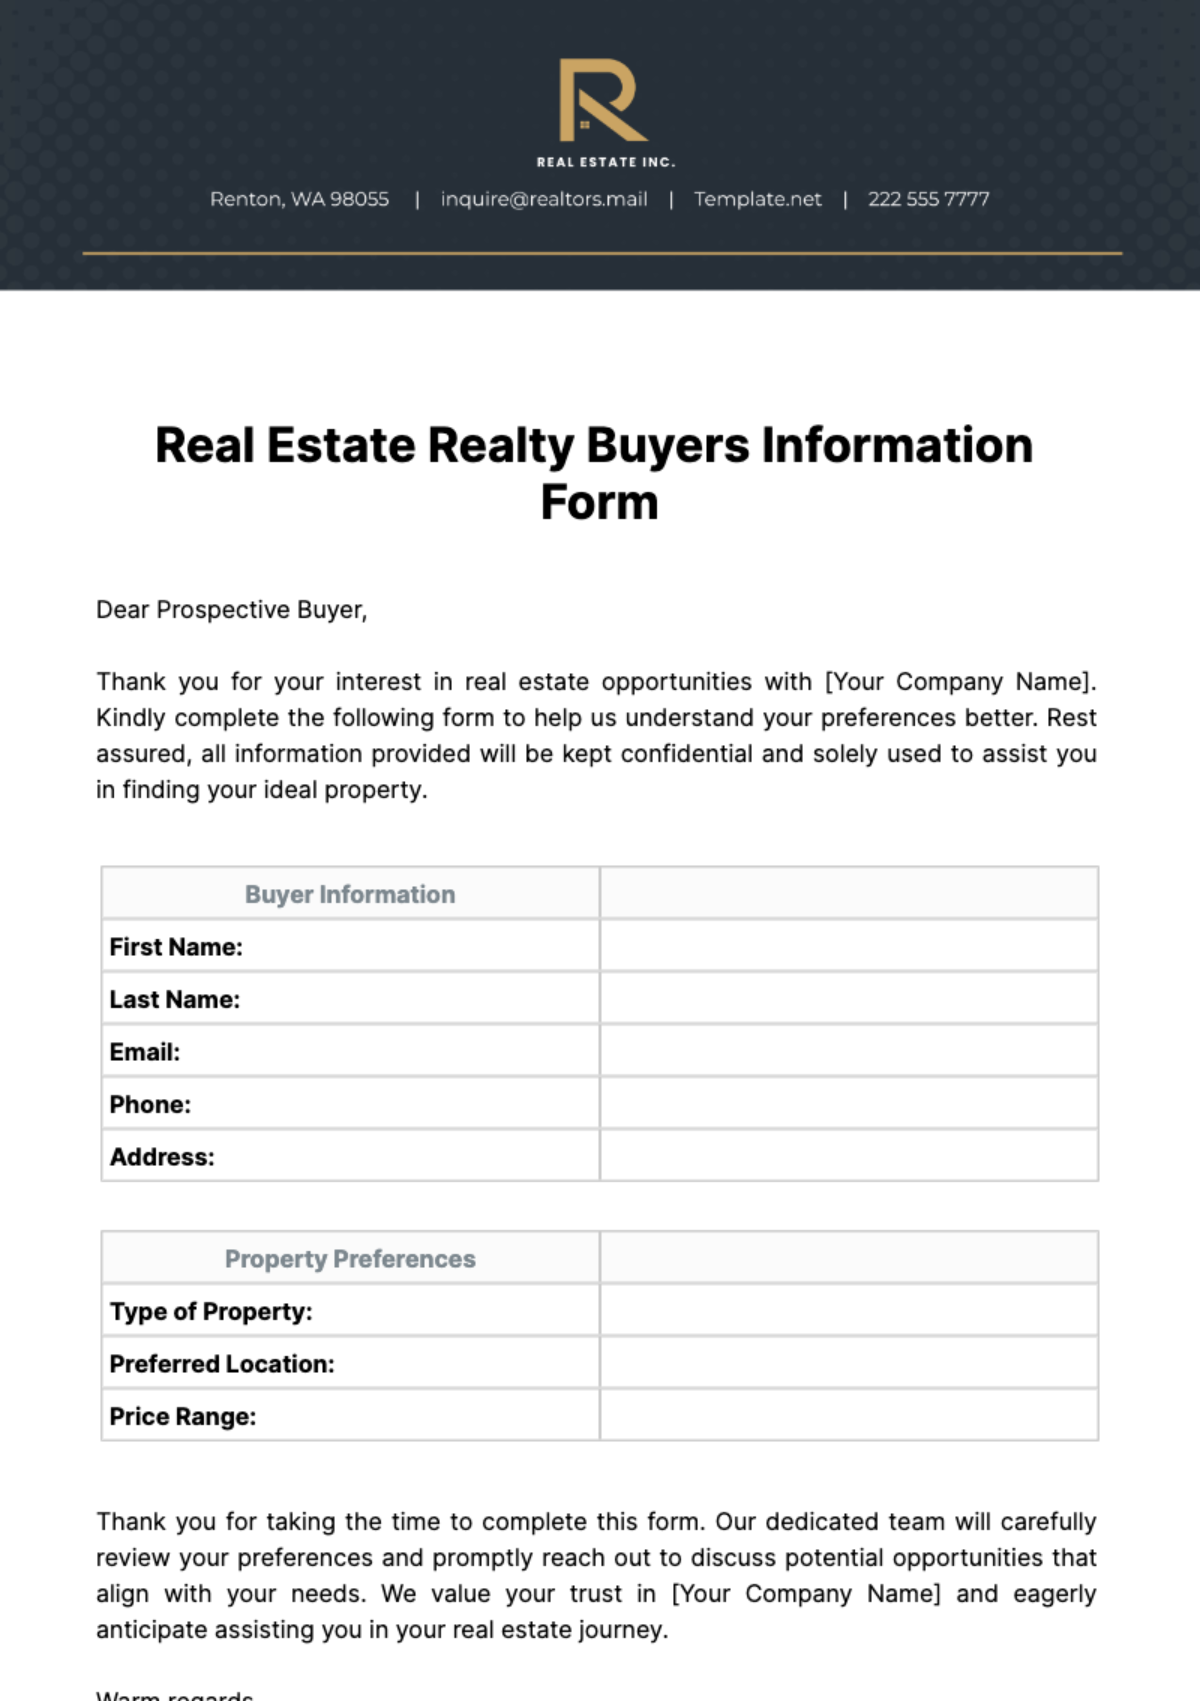 Real Estate Realty Buyers Information Form Template